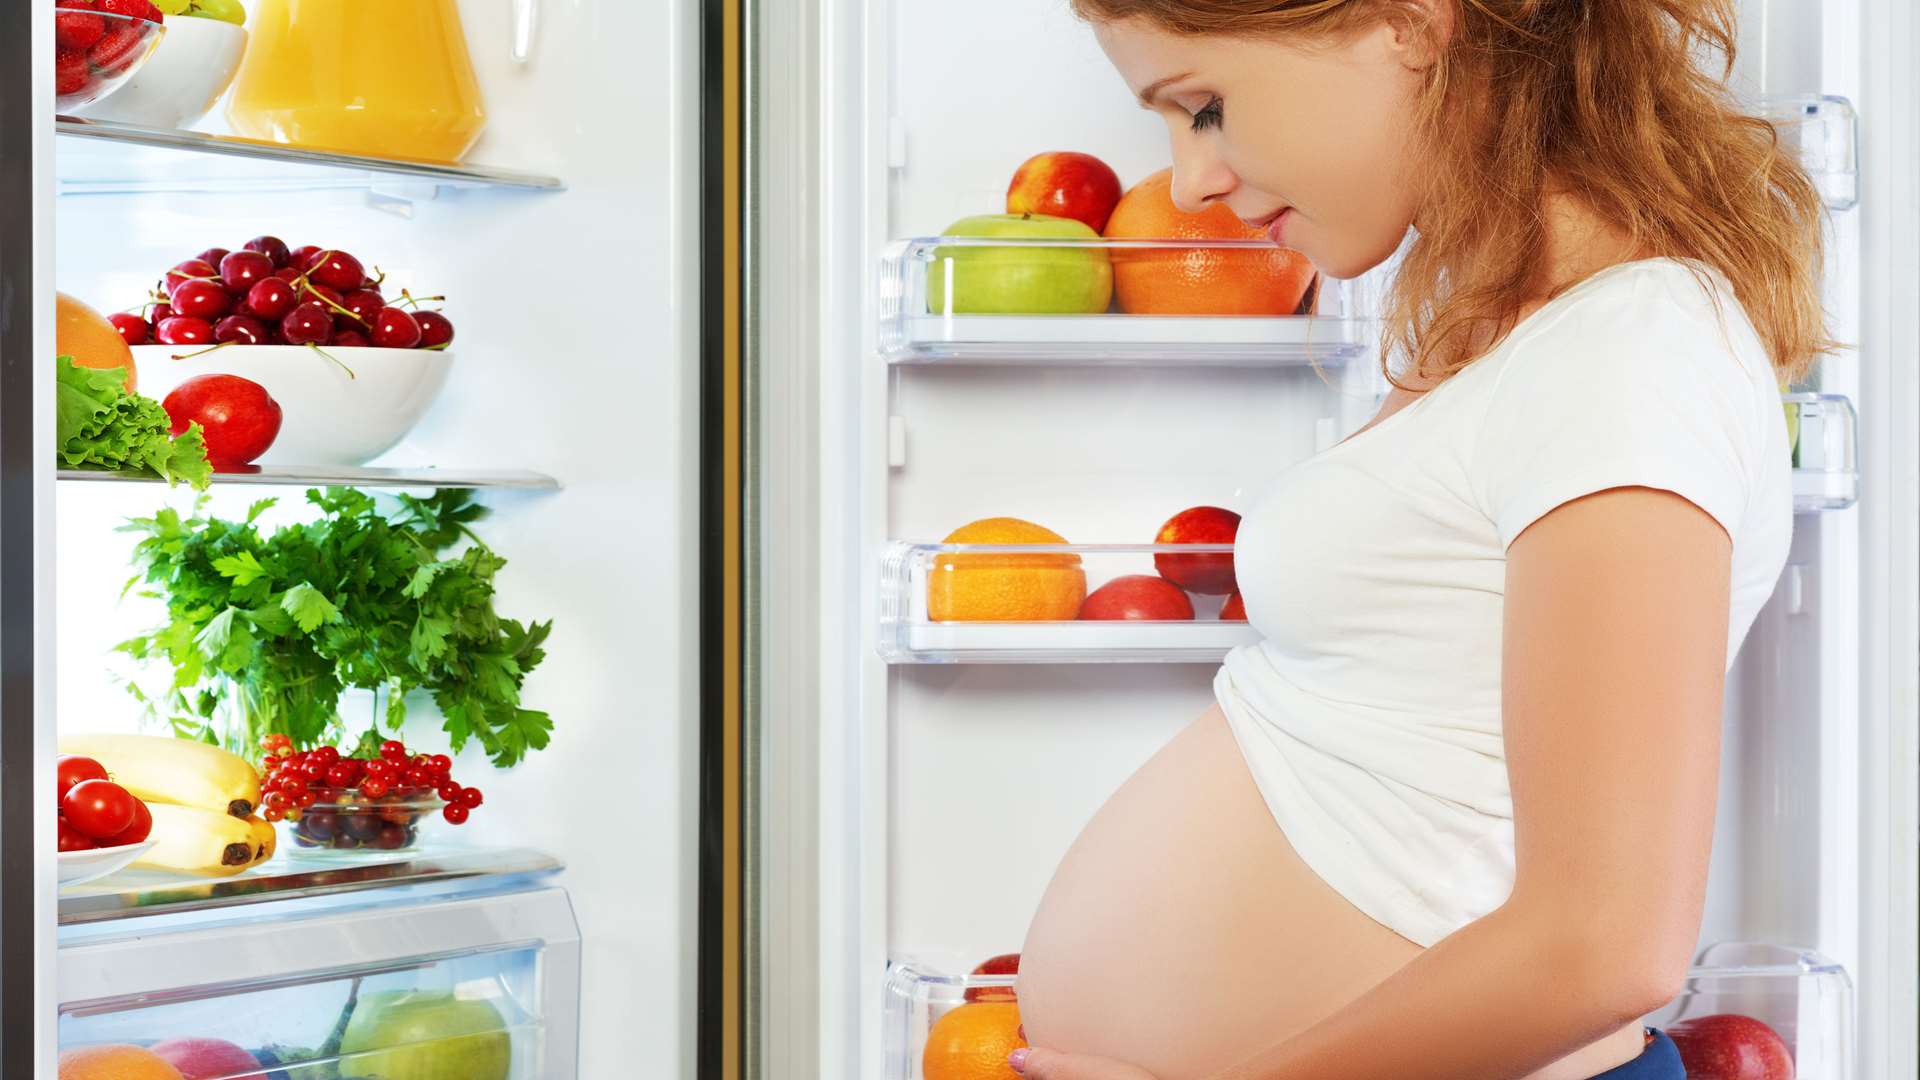 A balanced diet during pregnancy means less chance of complications